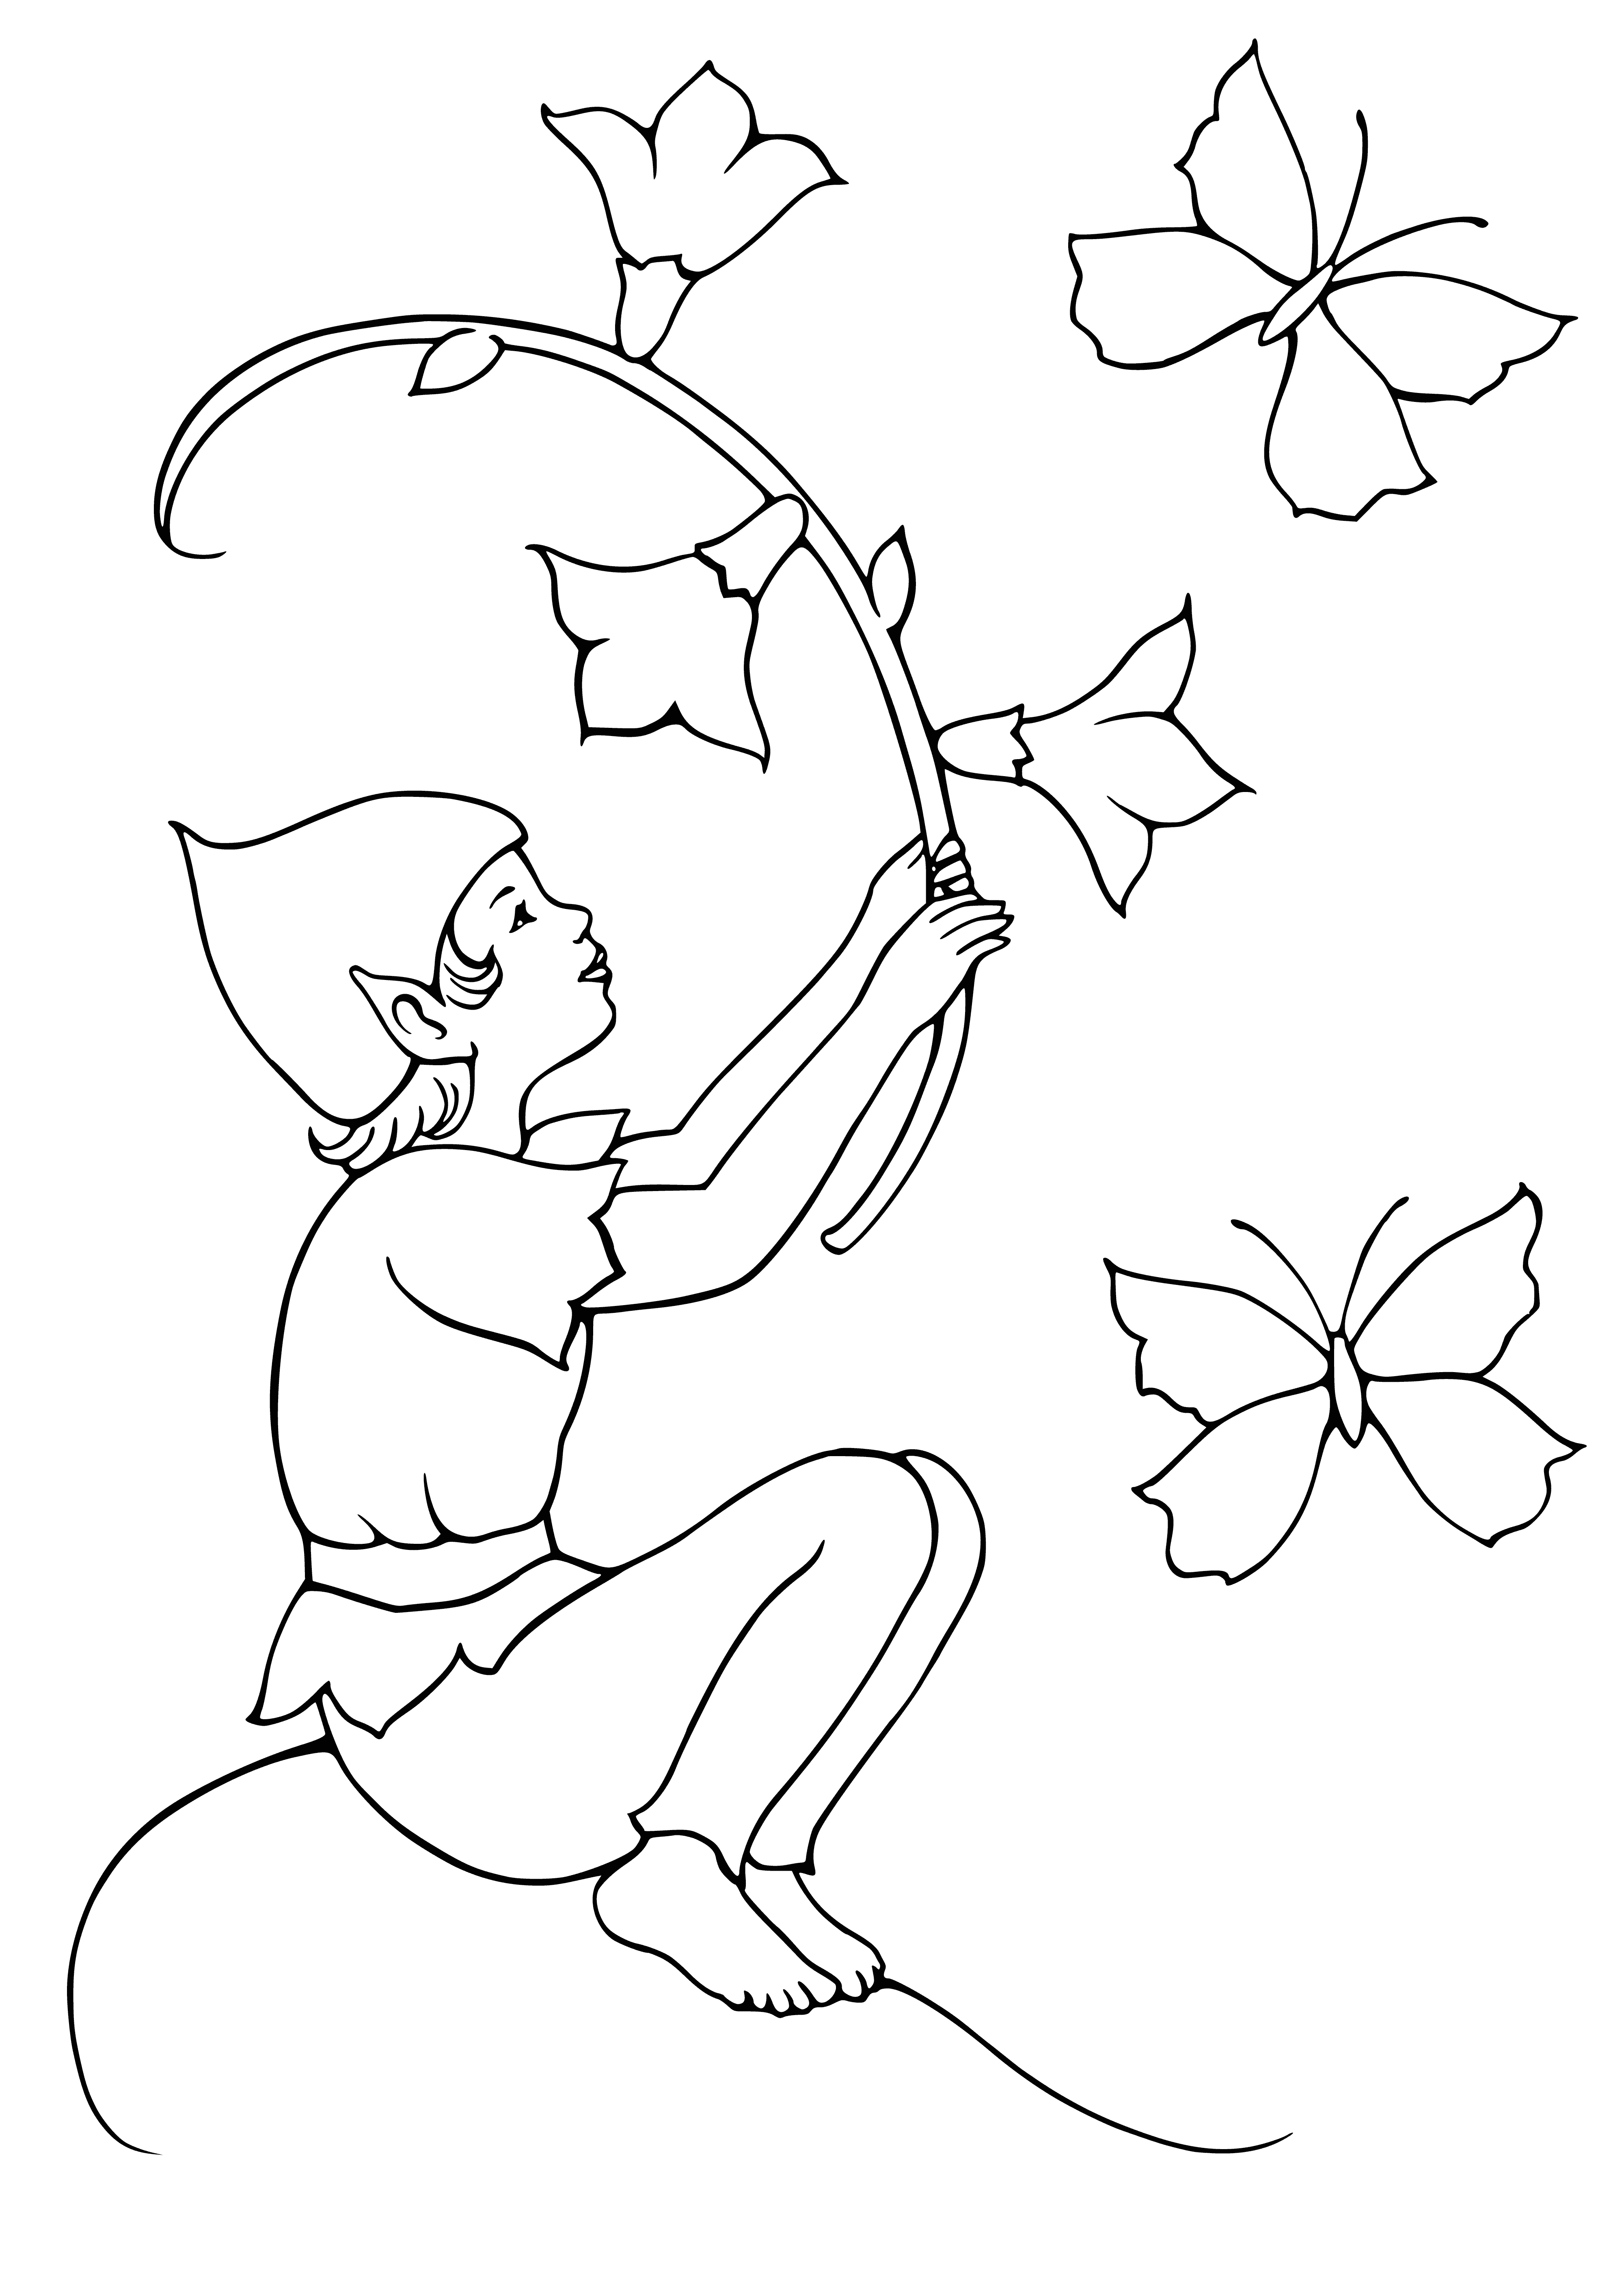 coloring page: Elf wearing green and brown is playing with bells and giggling, while fairy in purple with wand is casting a spell behind. #magic